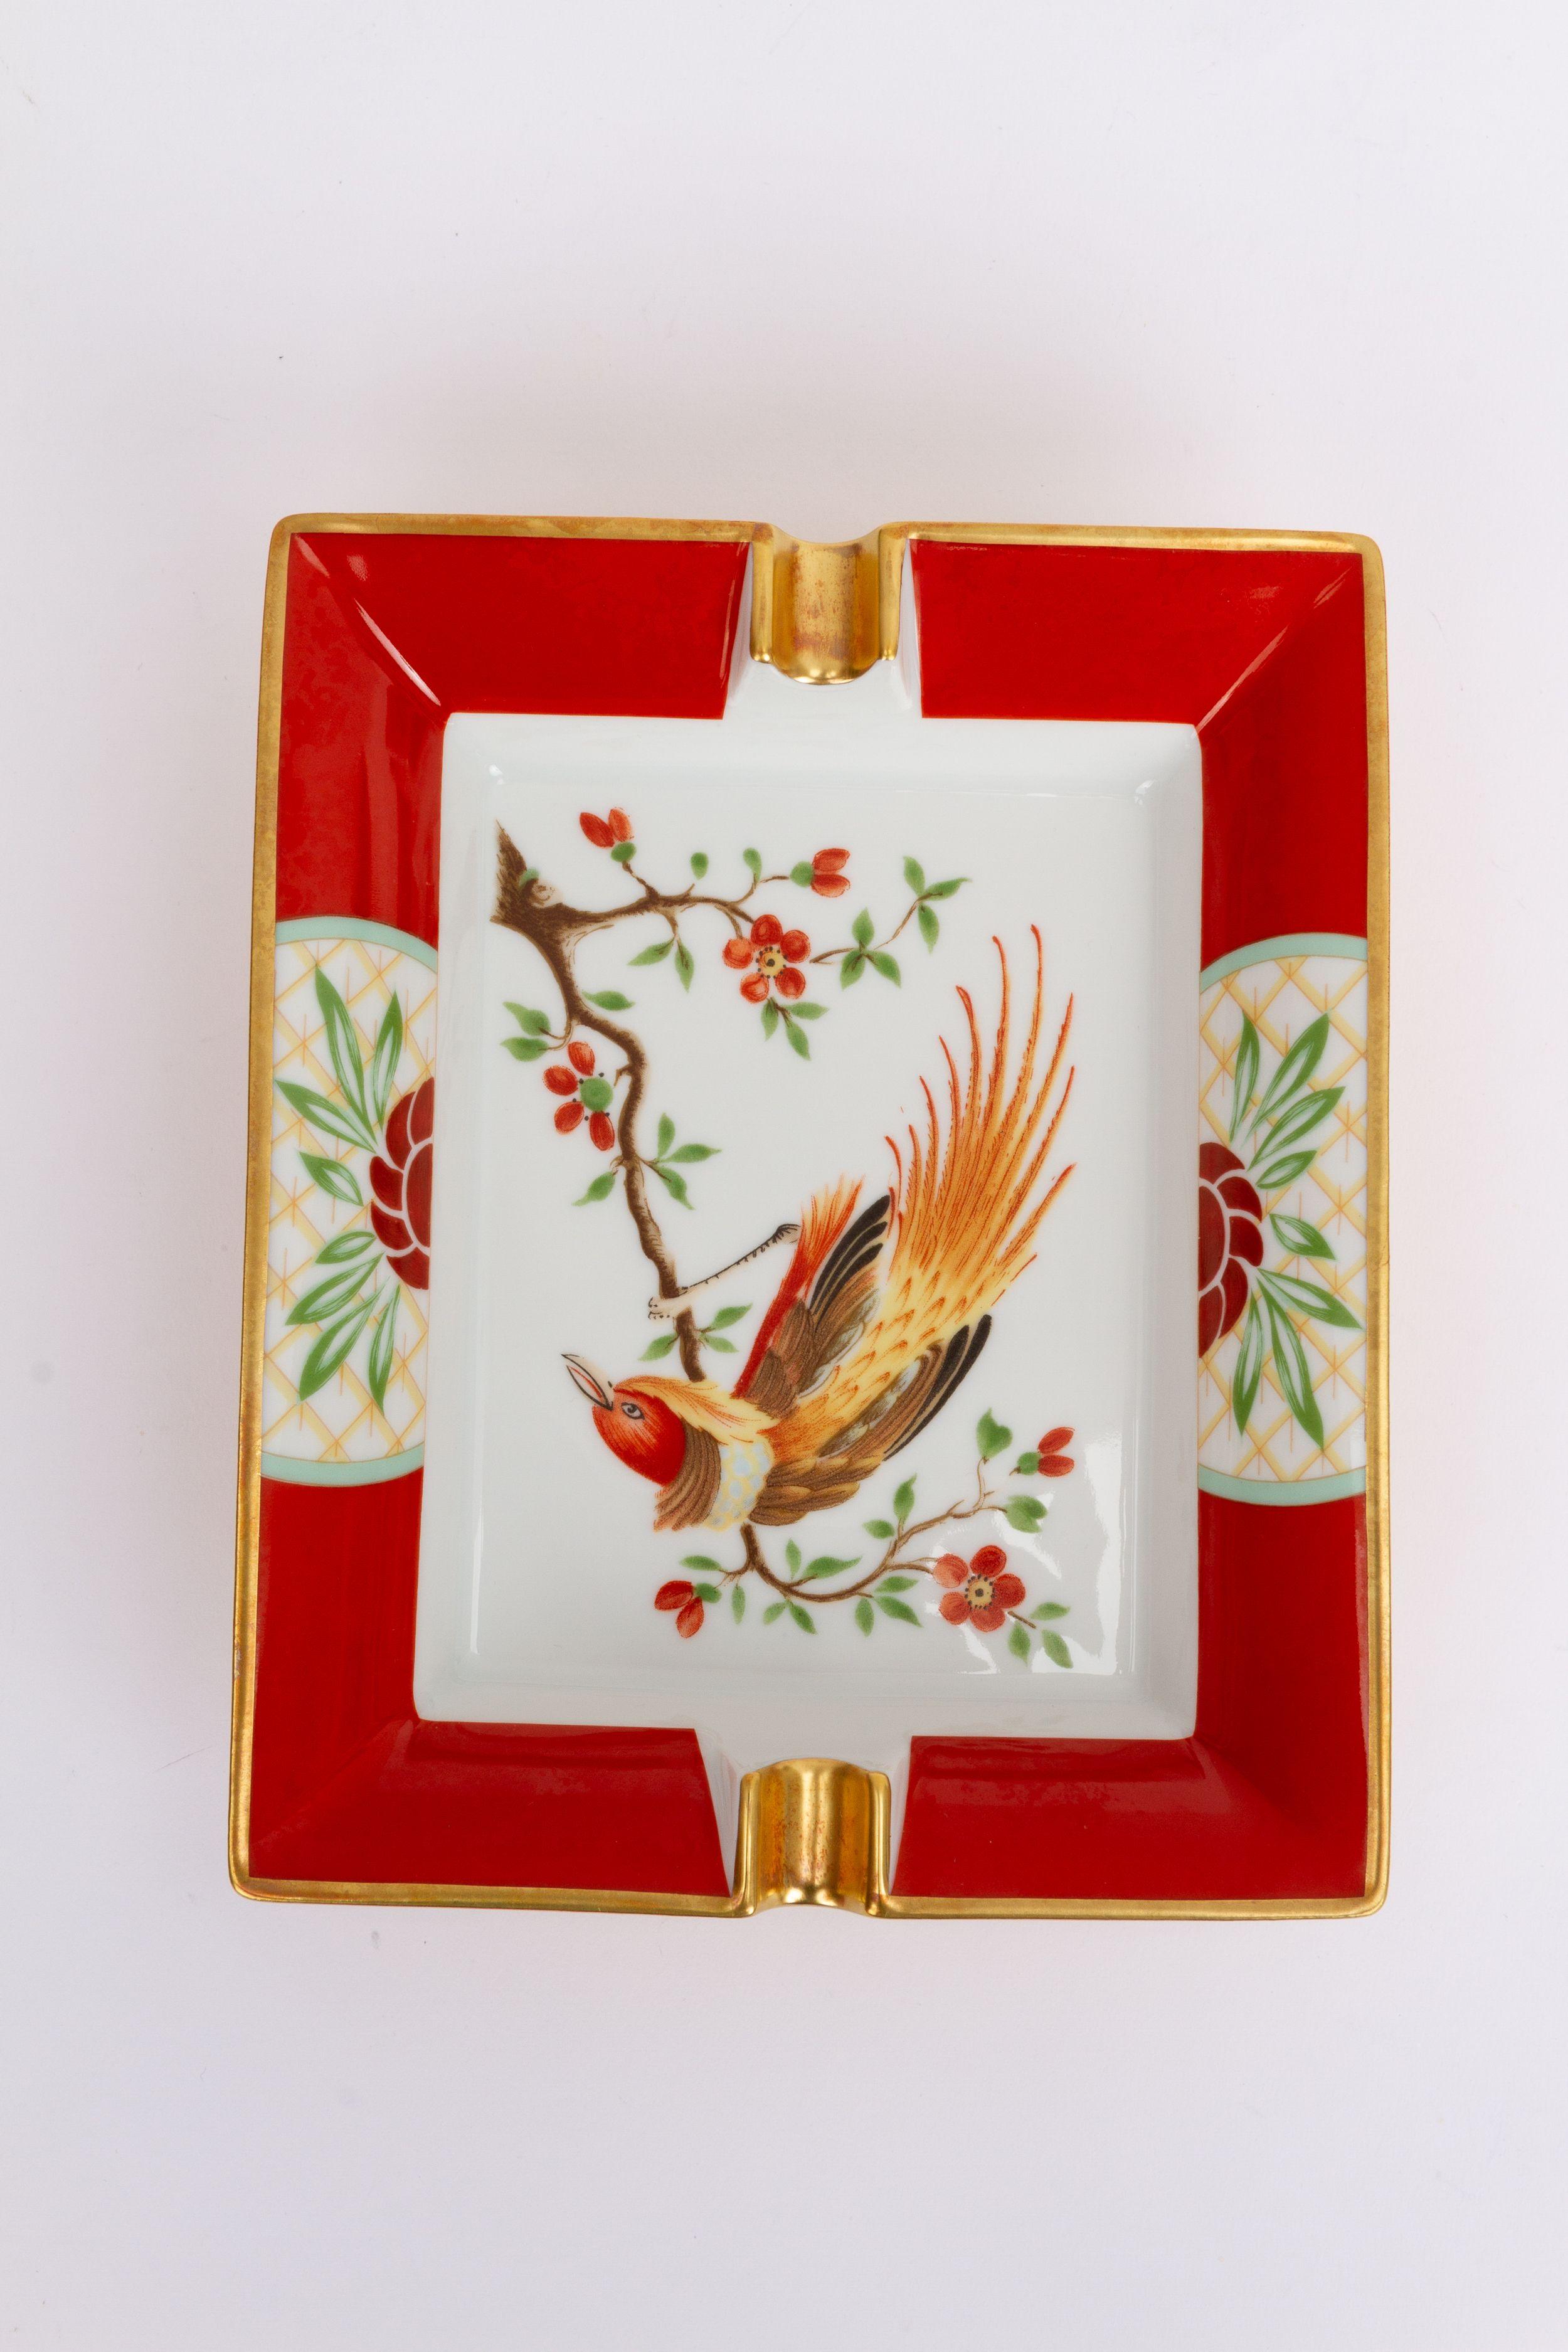 Hermès vintage ashtray in red. In the center of the piece is the image of an exotic bird who sits on a string of flowers. The ashtray is in excellent condition an comes with the original box.
